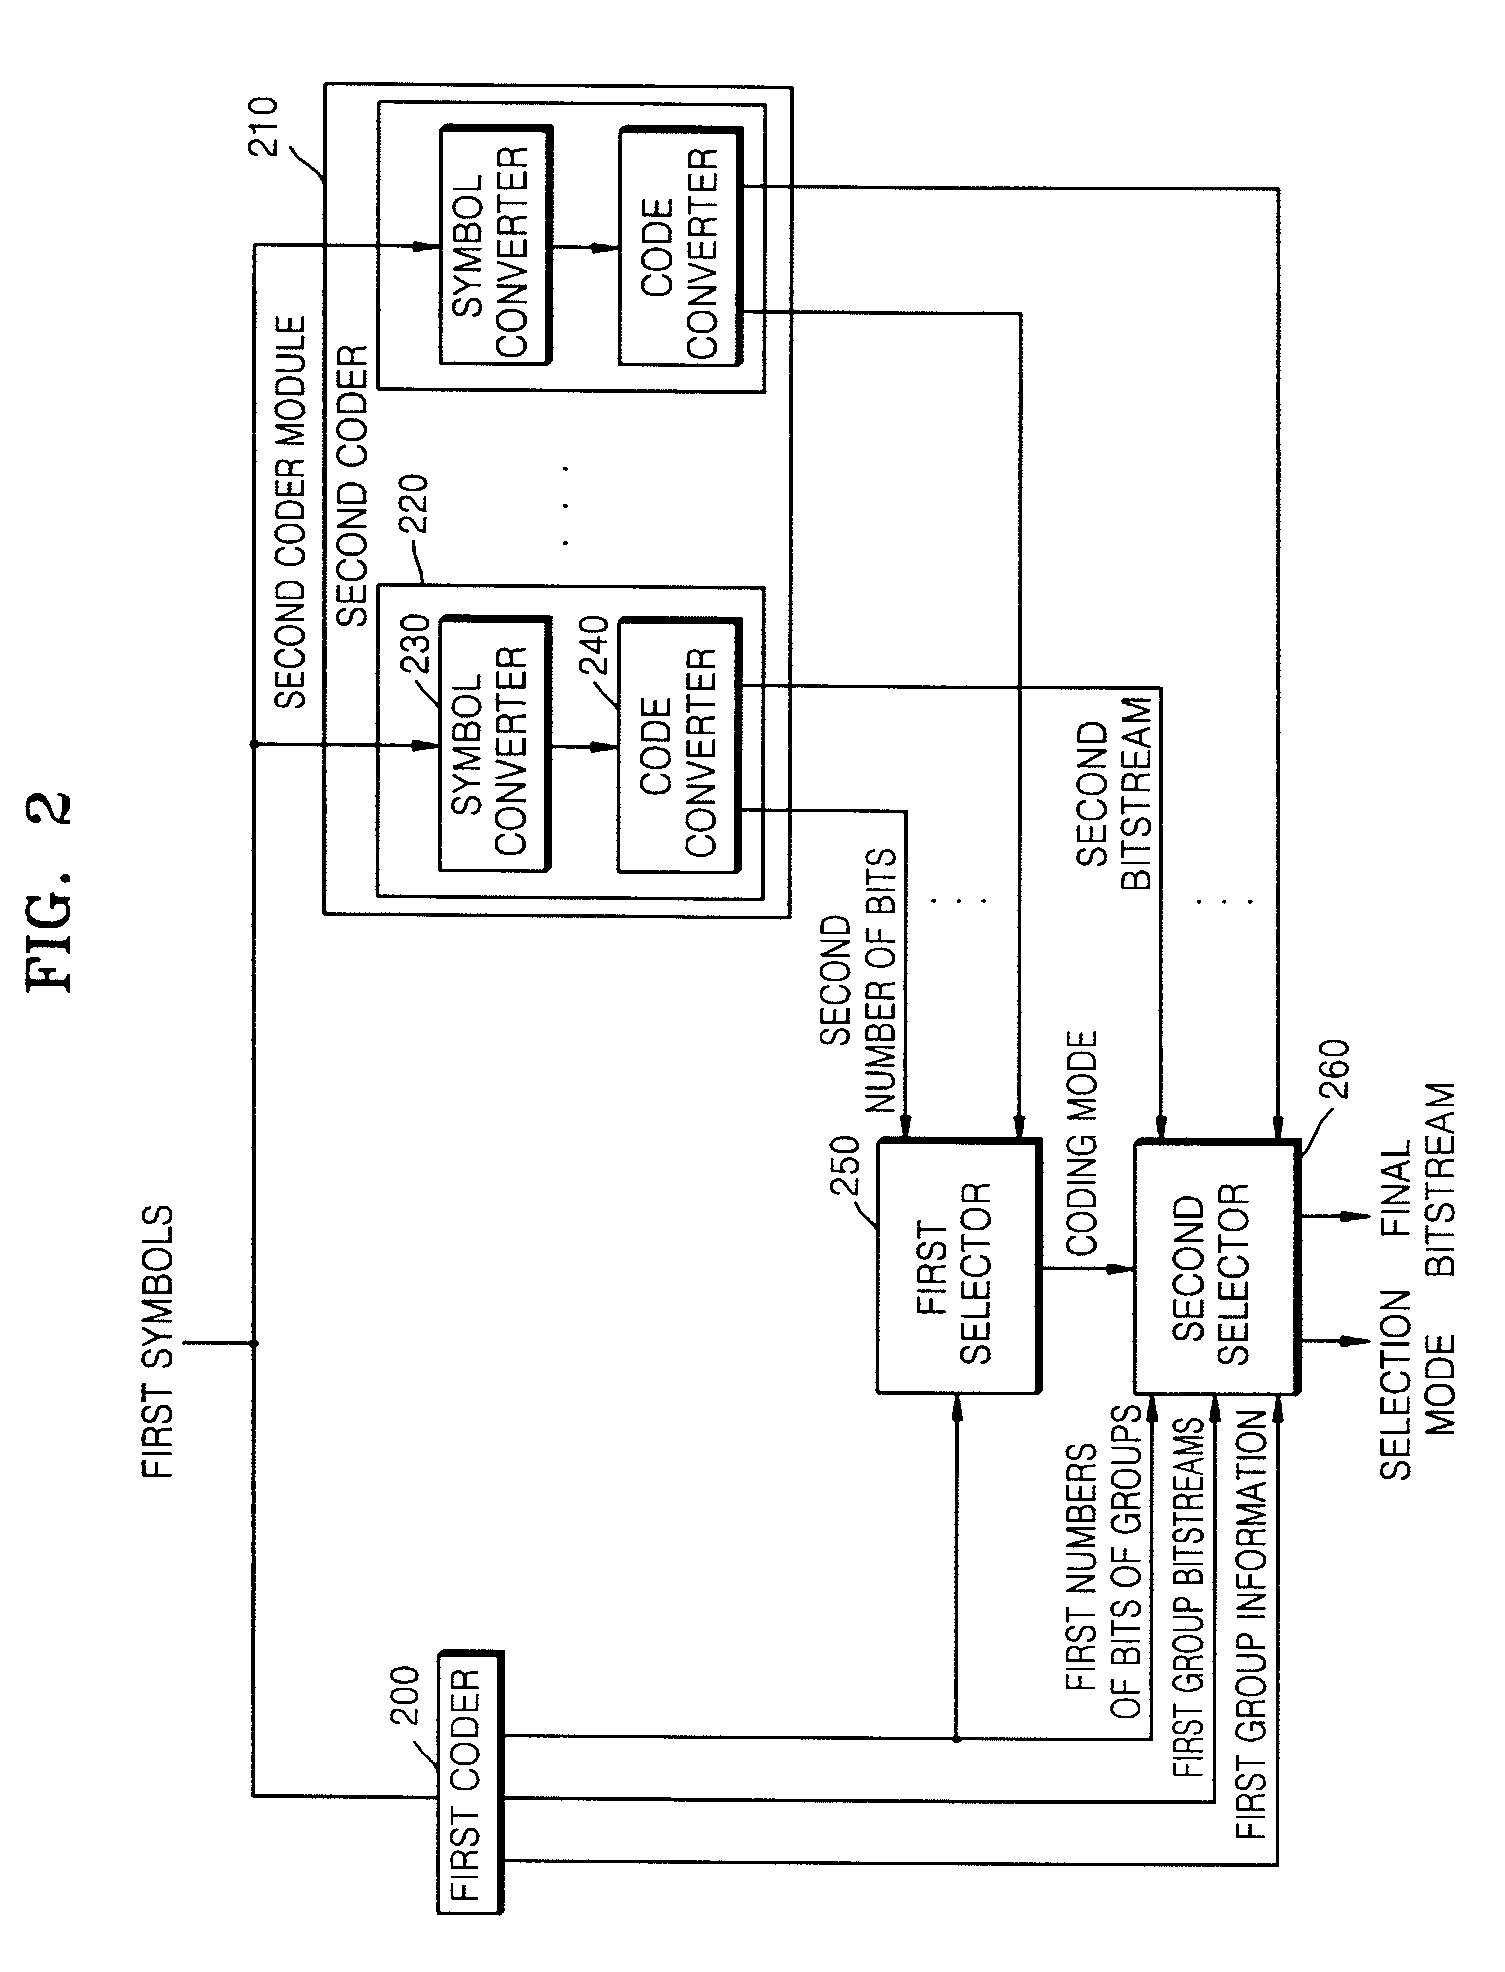 Lossless audio coding/decoding apparatus and method